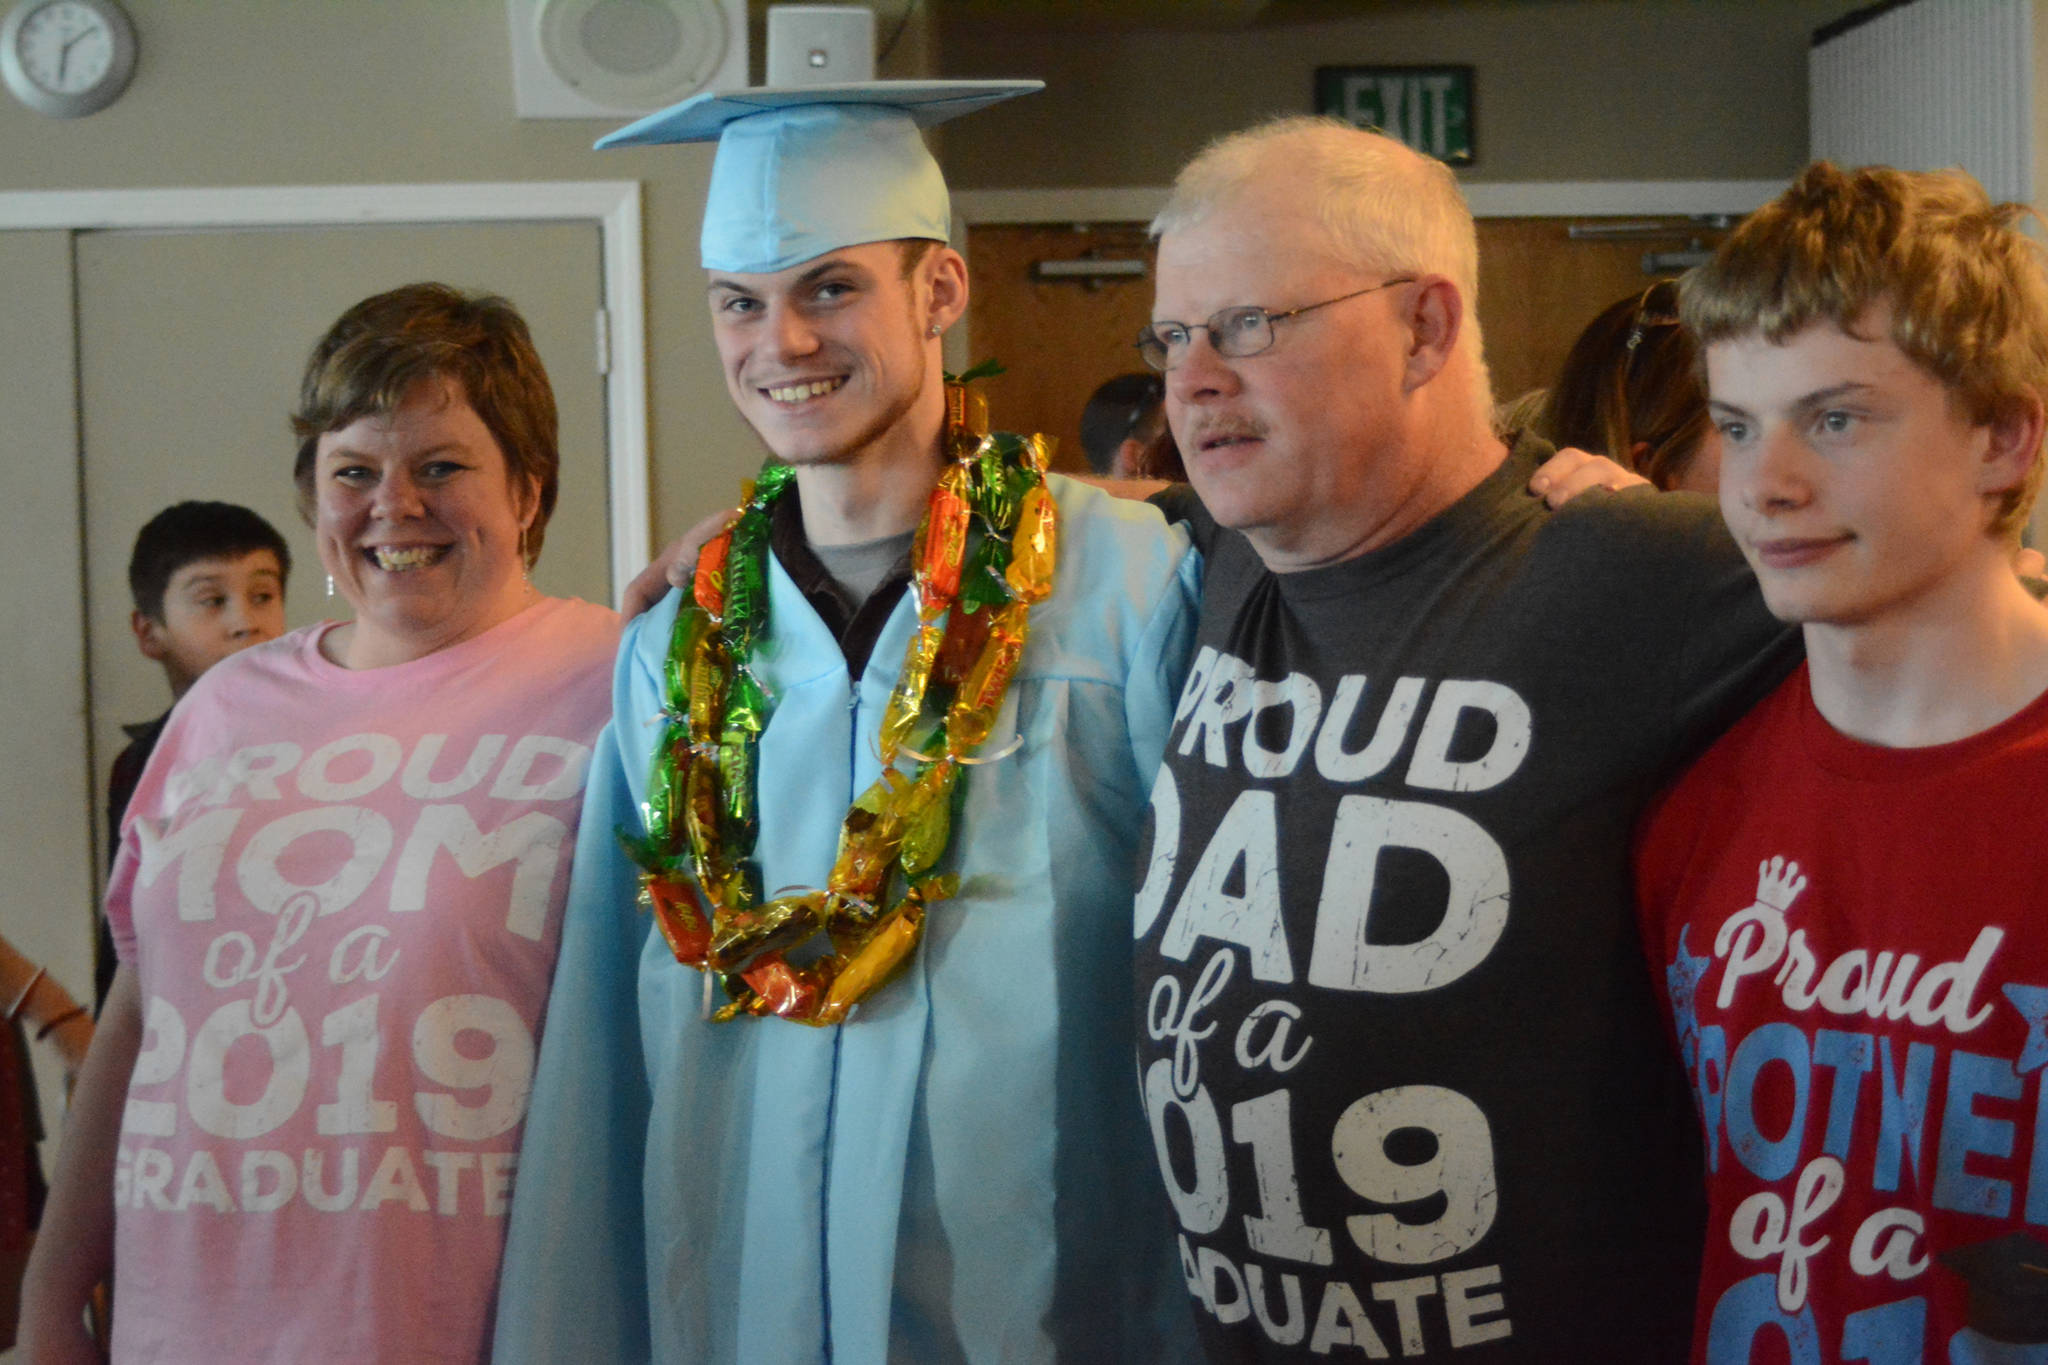 Graduate Sean Moran, second from left, poses with his family after at graduation ceremonies on Wednesday, May 22, 2019, at Land’s End Resort in Homer, Alaska. At left is his mother, Amanda Moran, at far right is his brother, Joseph Moran, and second from right is his father, Donald Moran. (Photo by Michael Armstrong/Homer News)